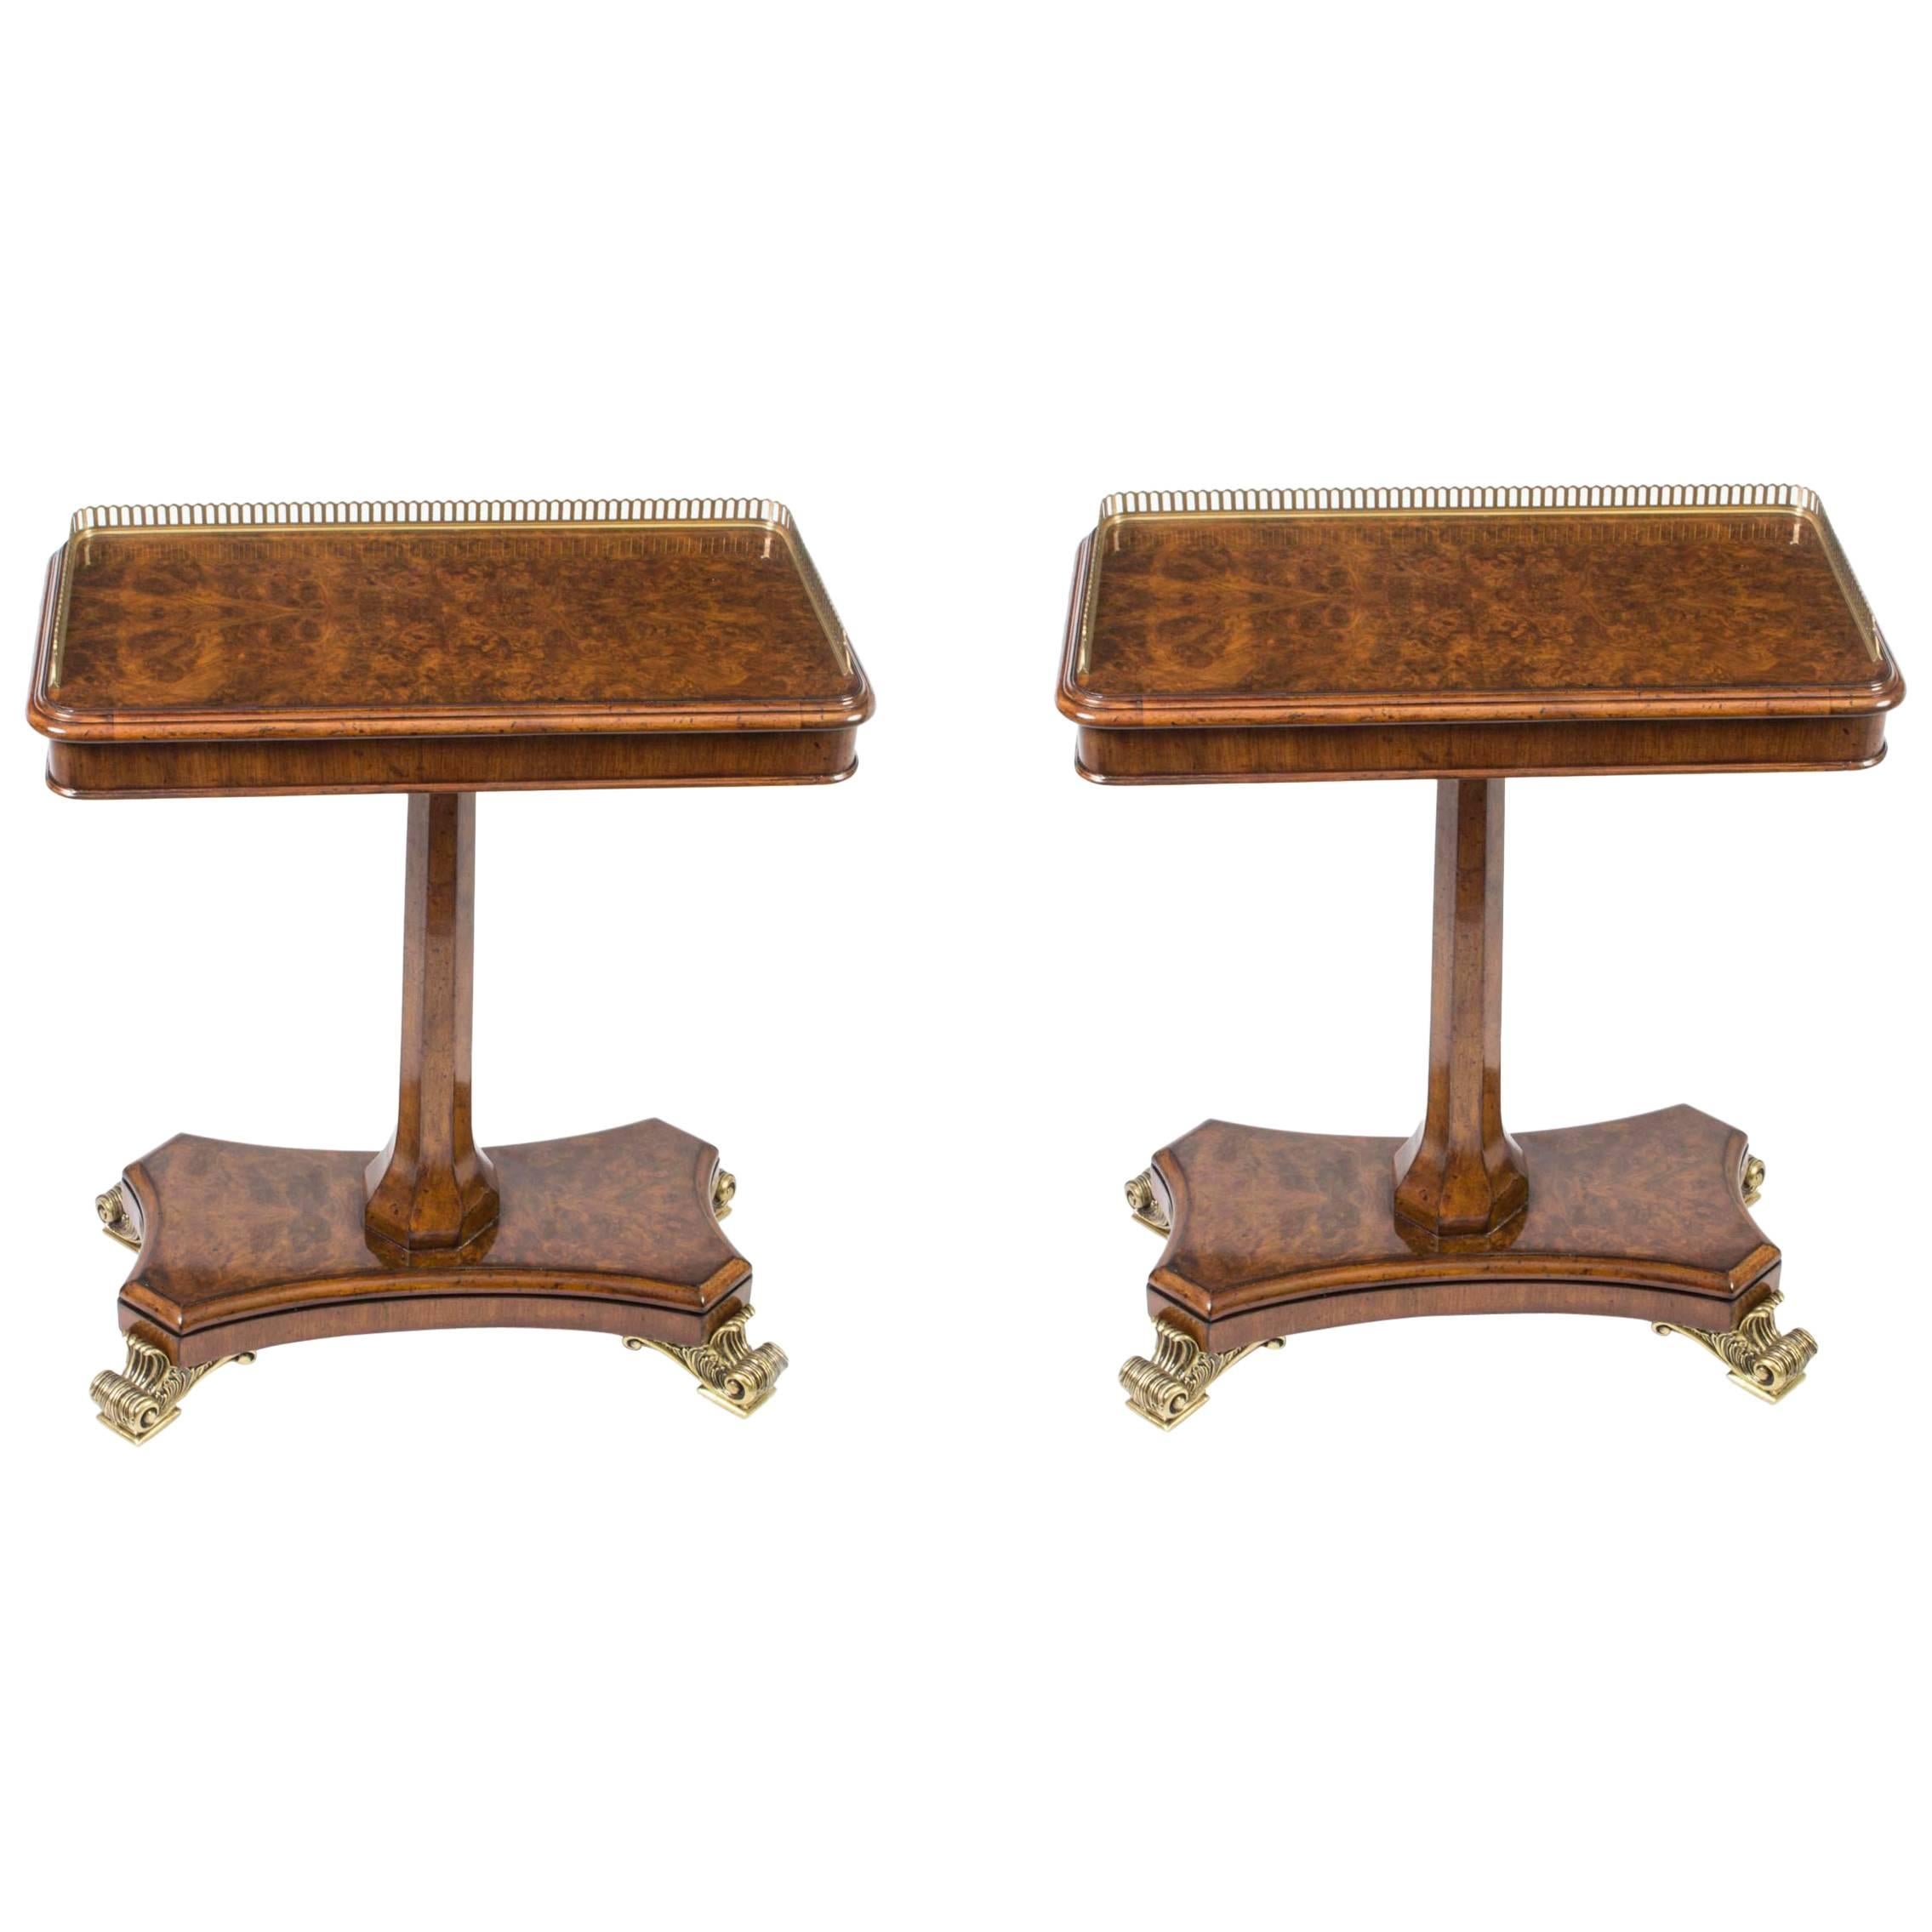 Pair of Regency Style Burr Walnut Occasional Tables